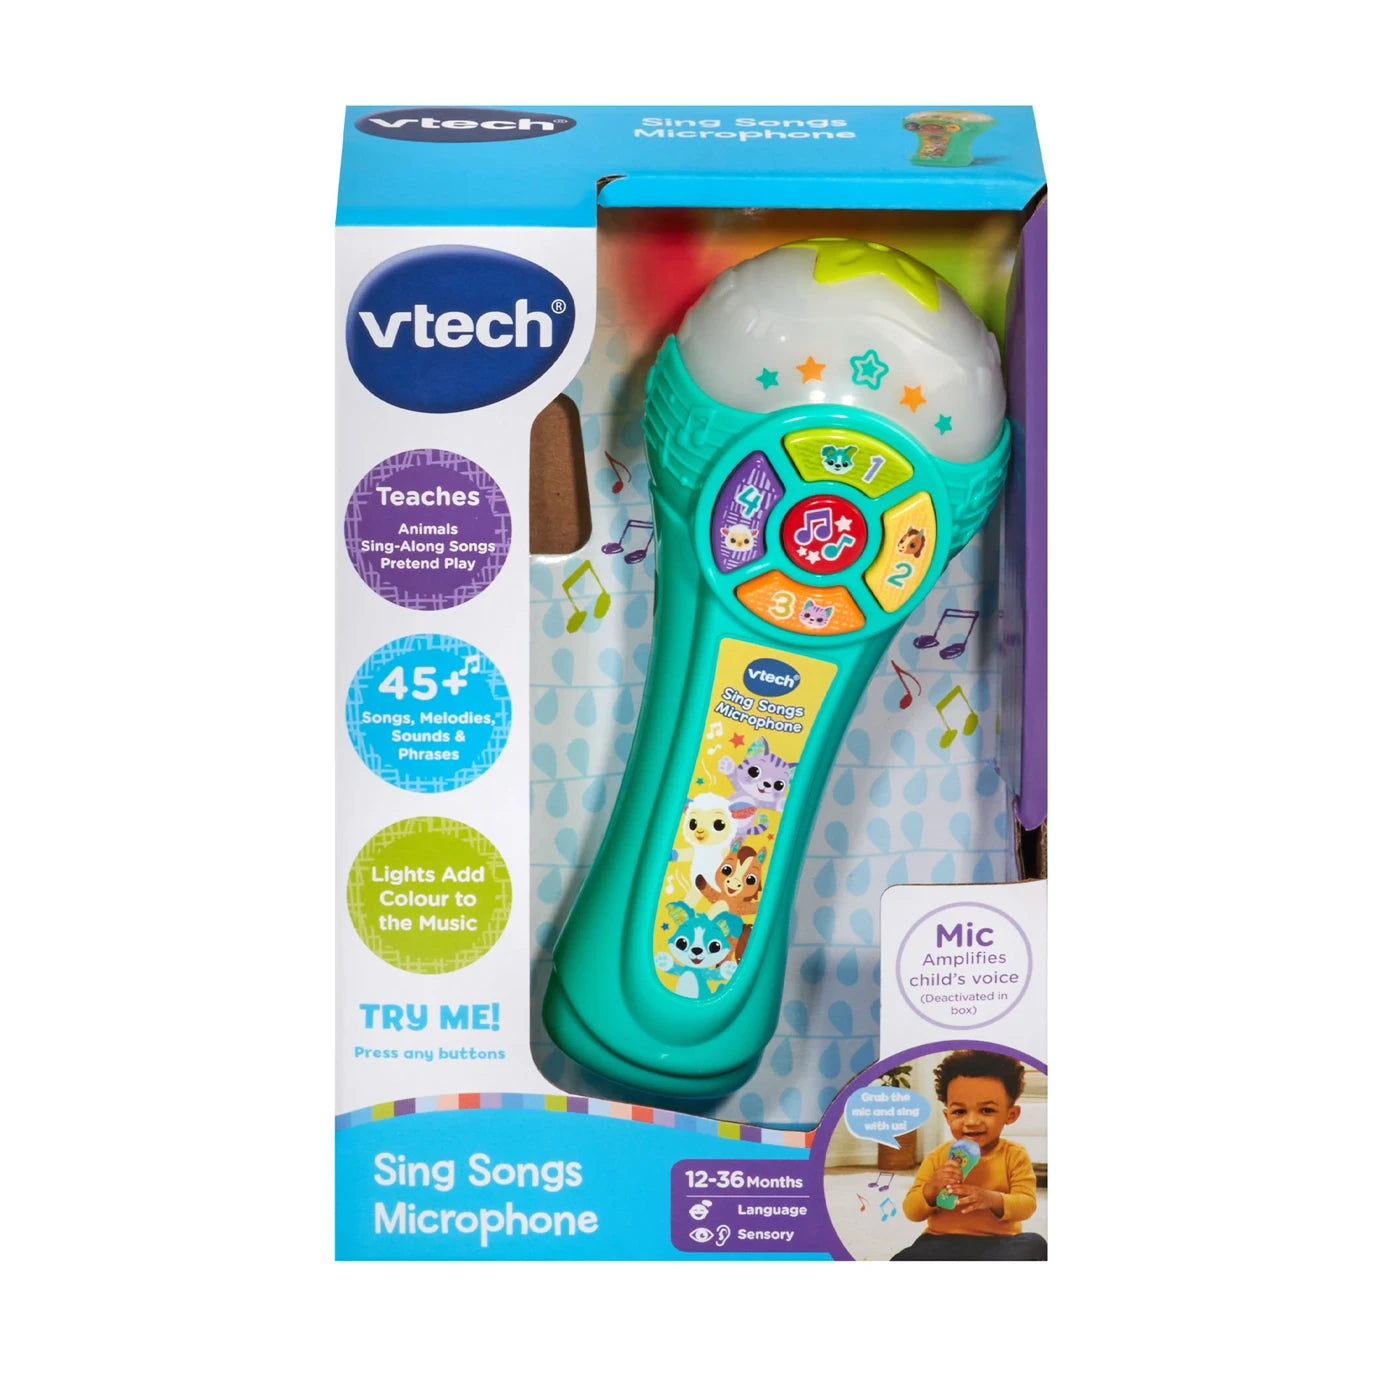 Vtech Sing Songs Microphone 2 x AAA demo batteries included